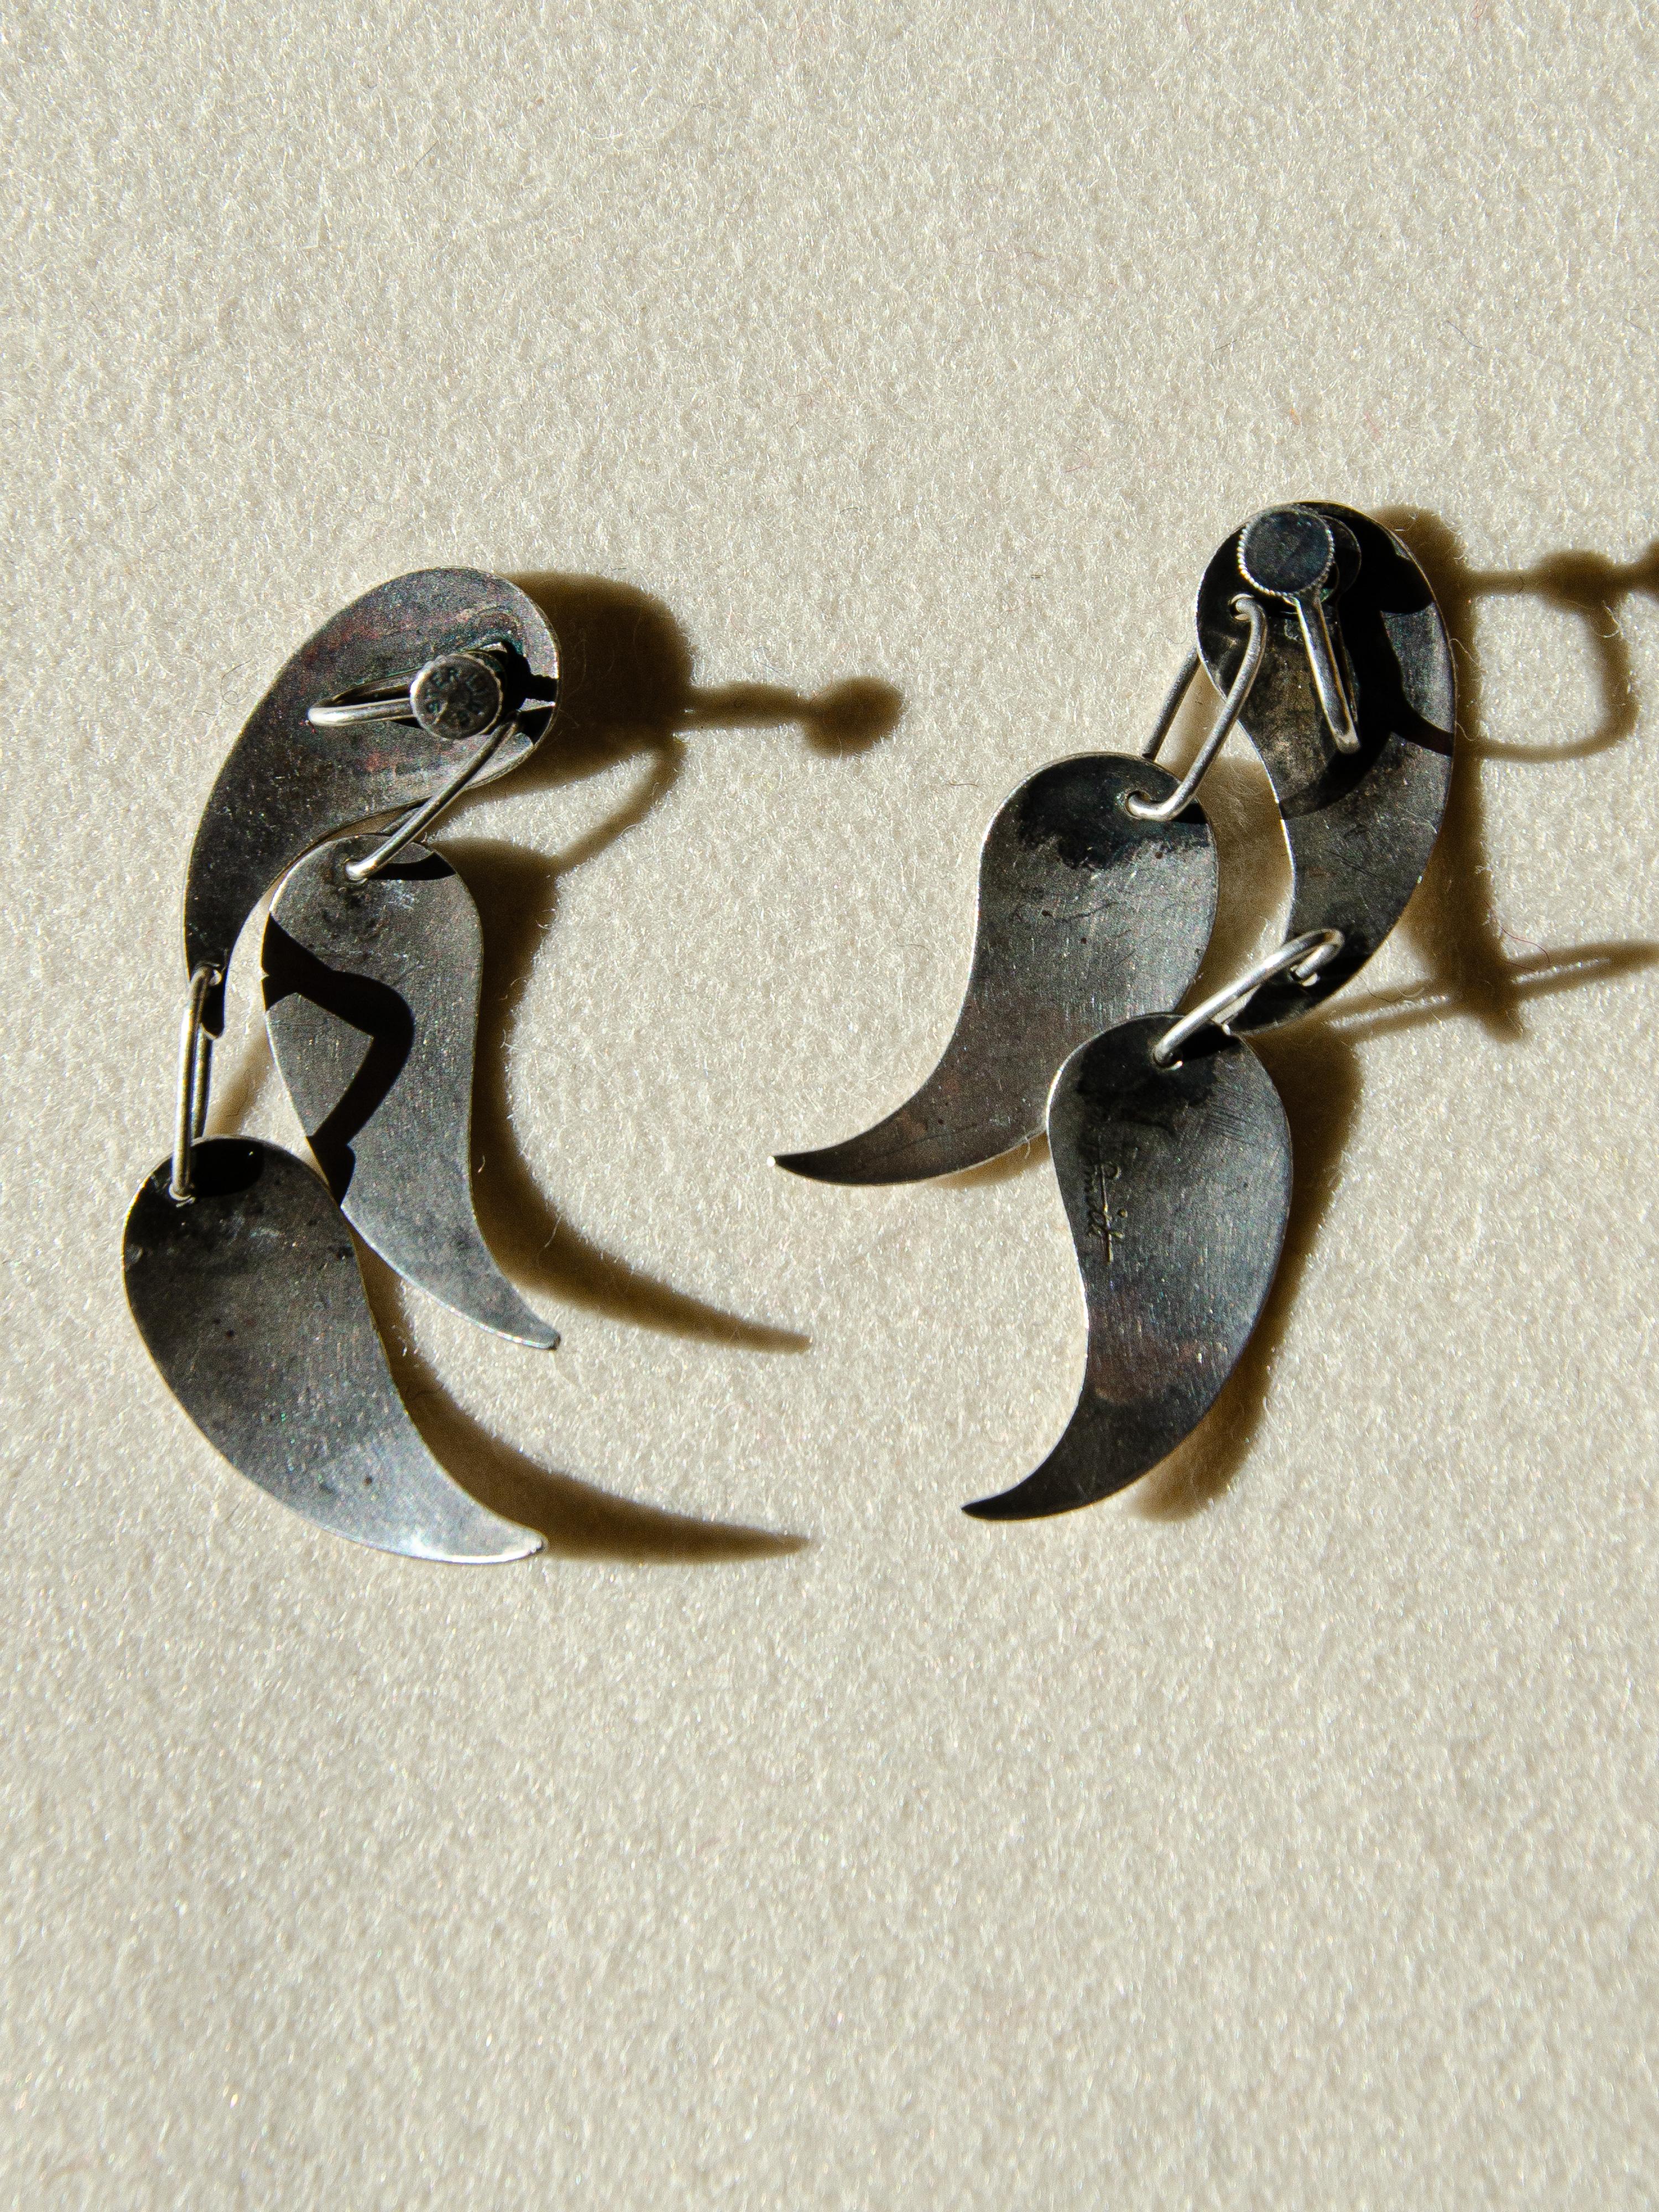 Hand-Crafted Rare Mid-Century Modernist Sterling Silver Petal Earrings By Art Smith For Sale